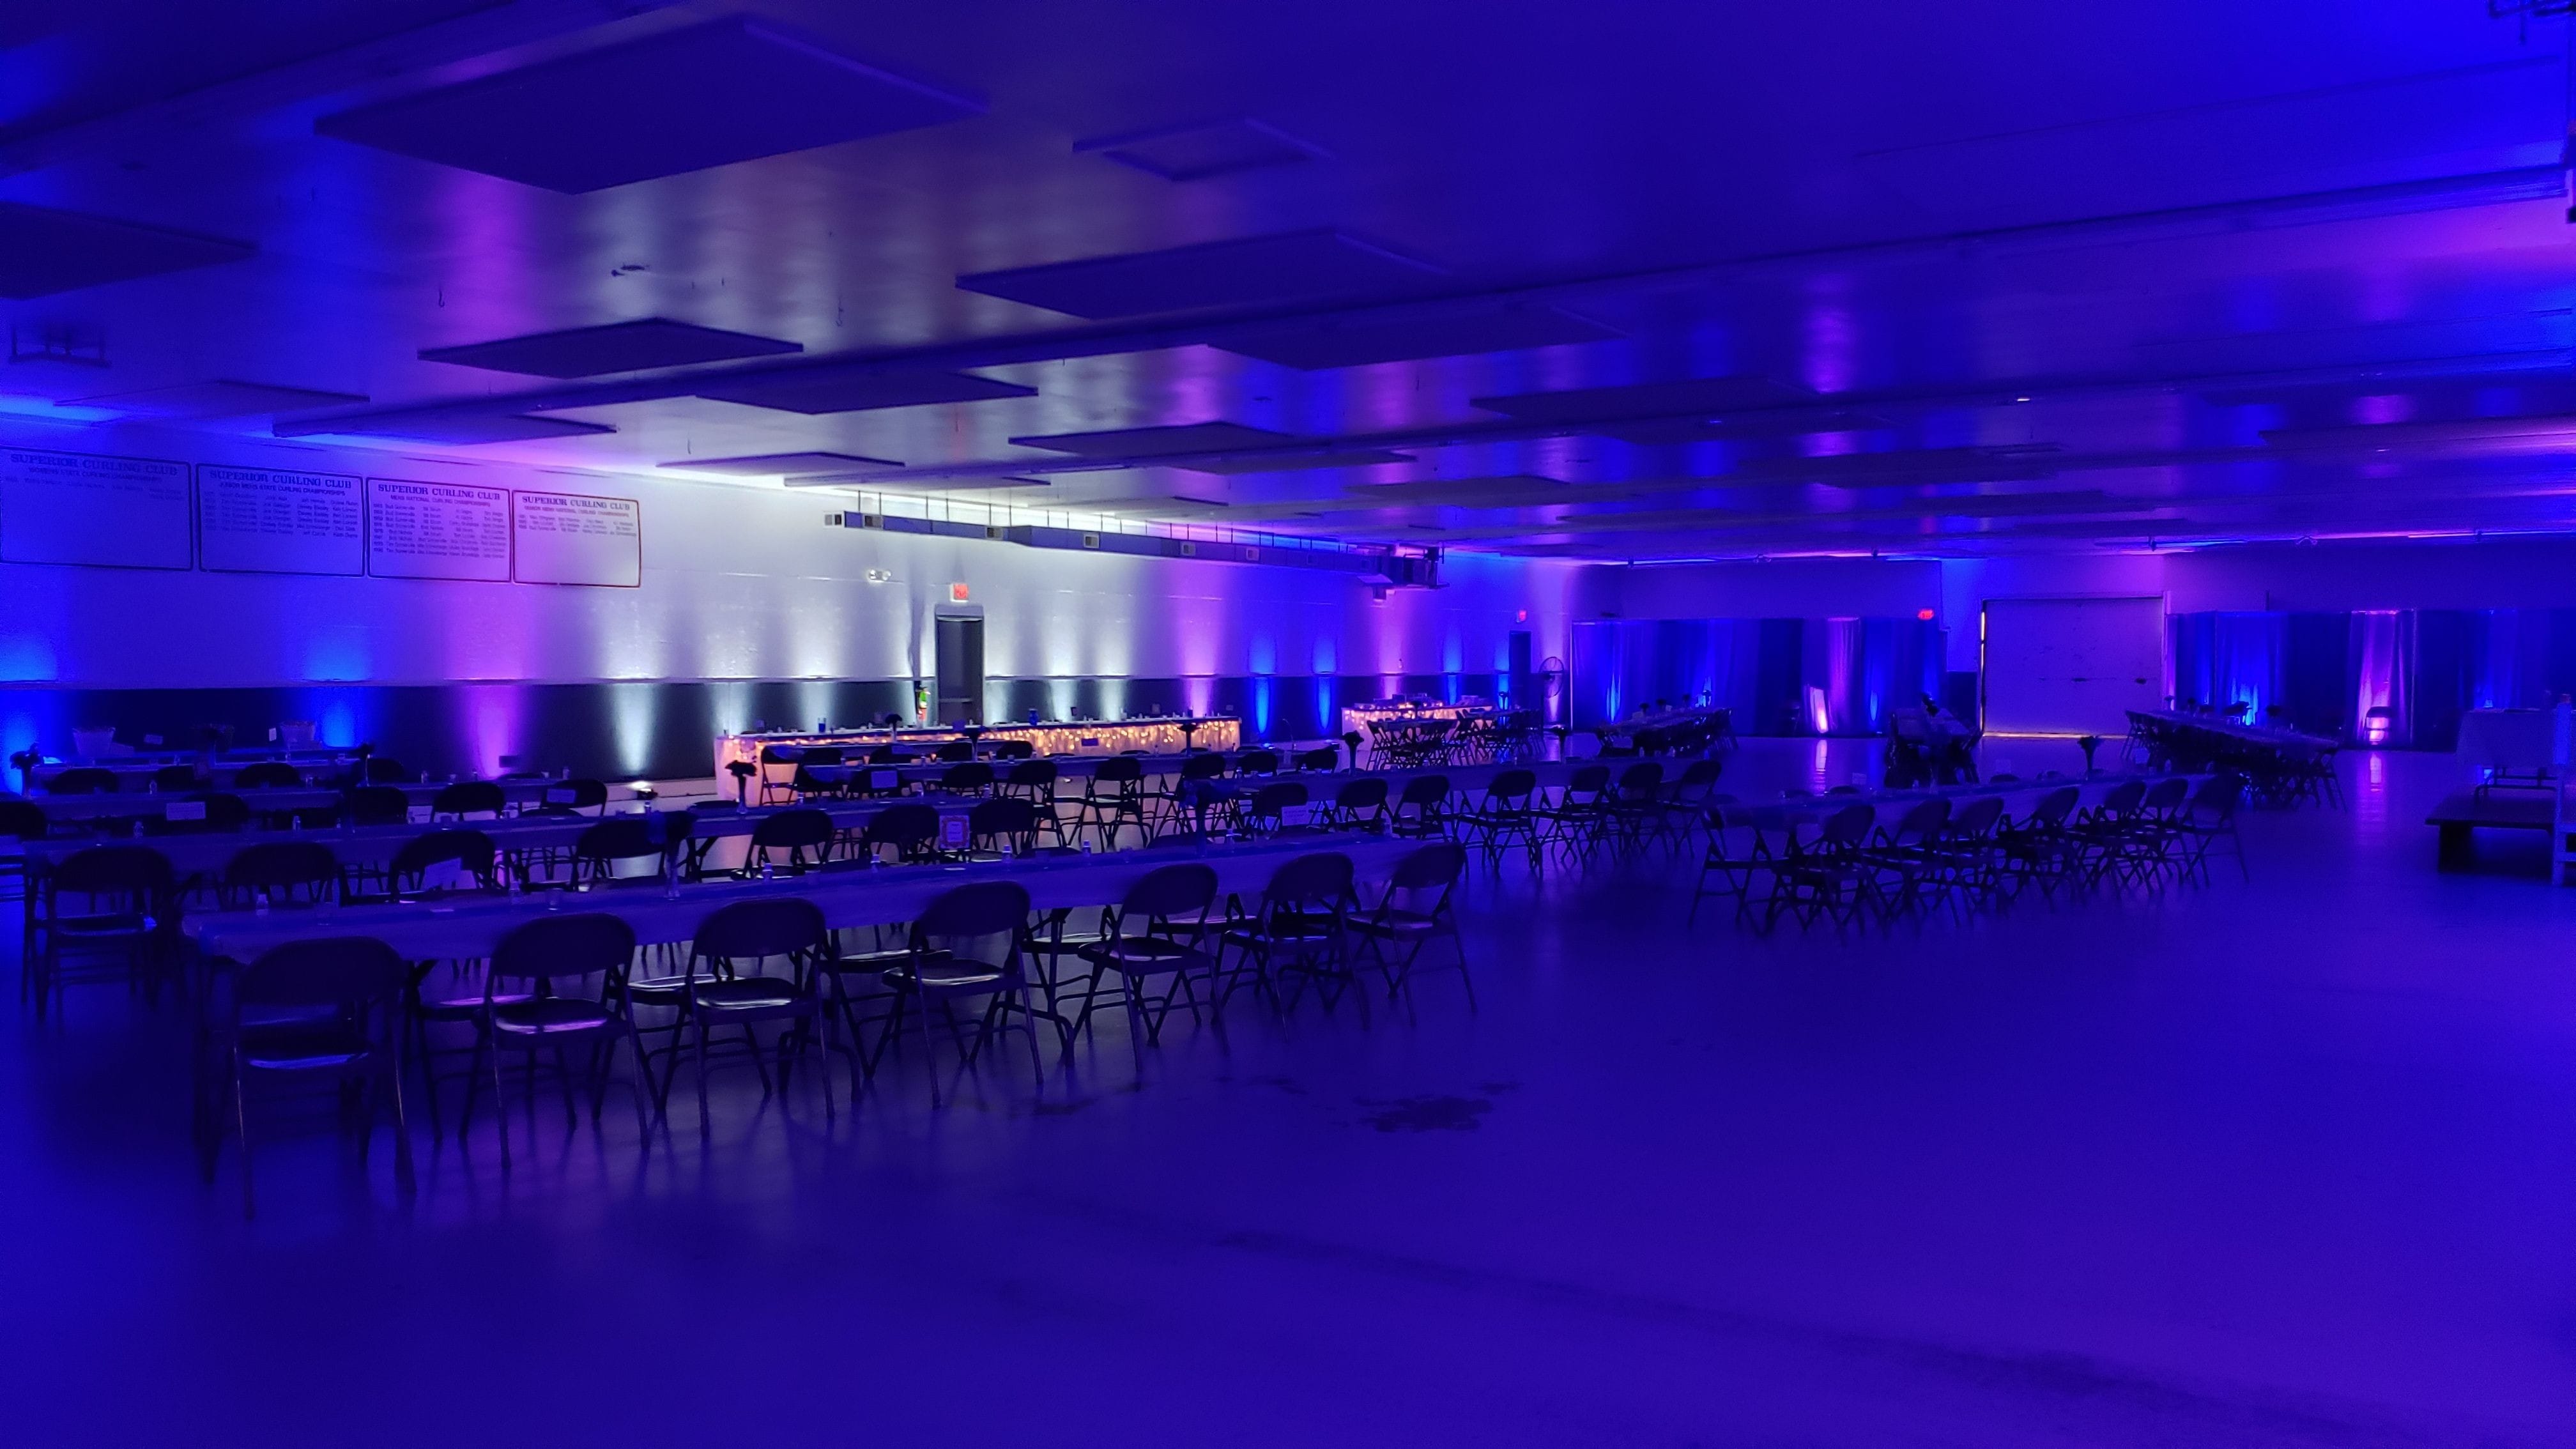 Superior Curling Club.
Up lighting in a two blue to one lavender ratio. White up lighting behind the head table.